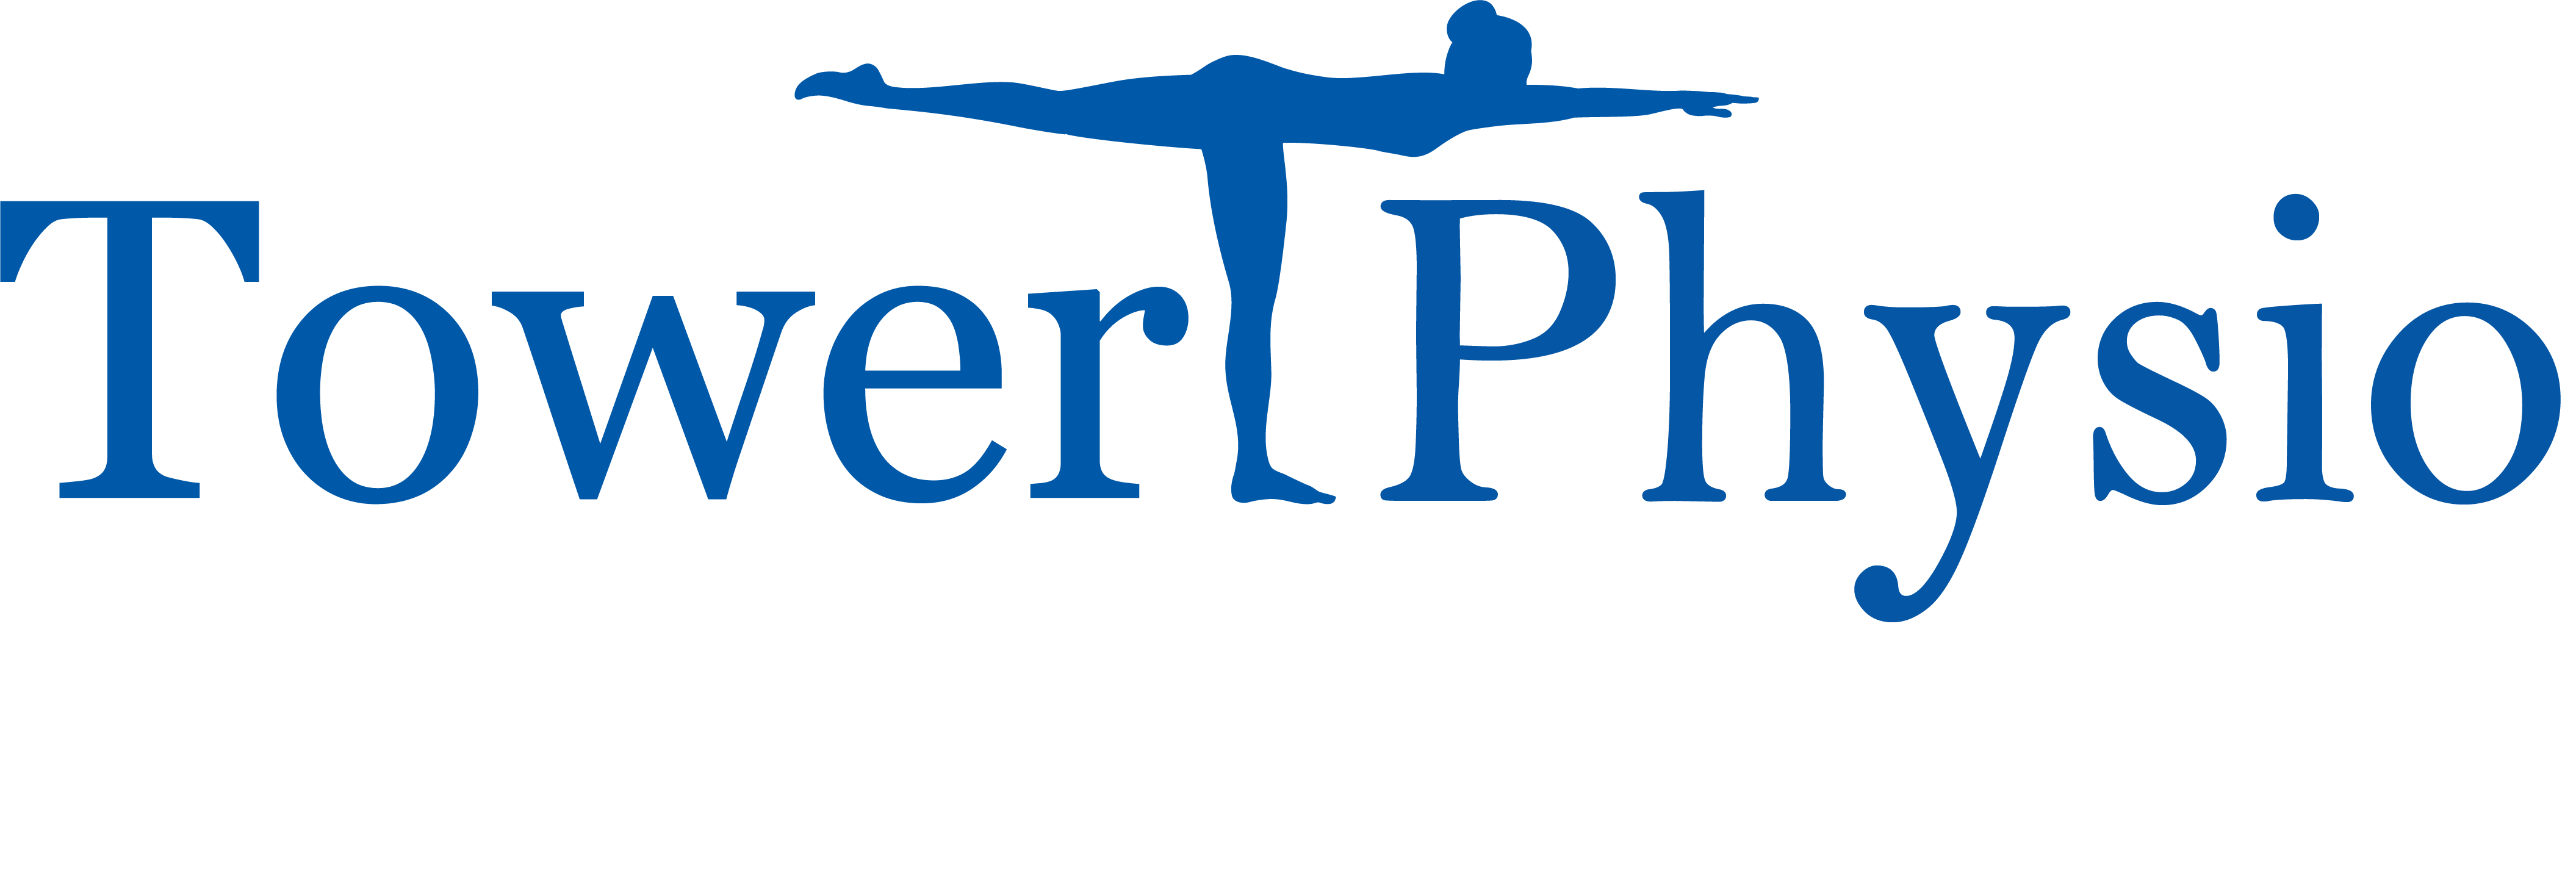 Tower Physiotherapy & Sports Medicine